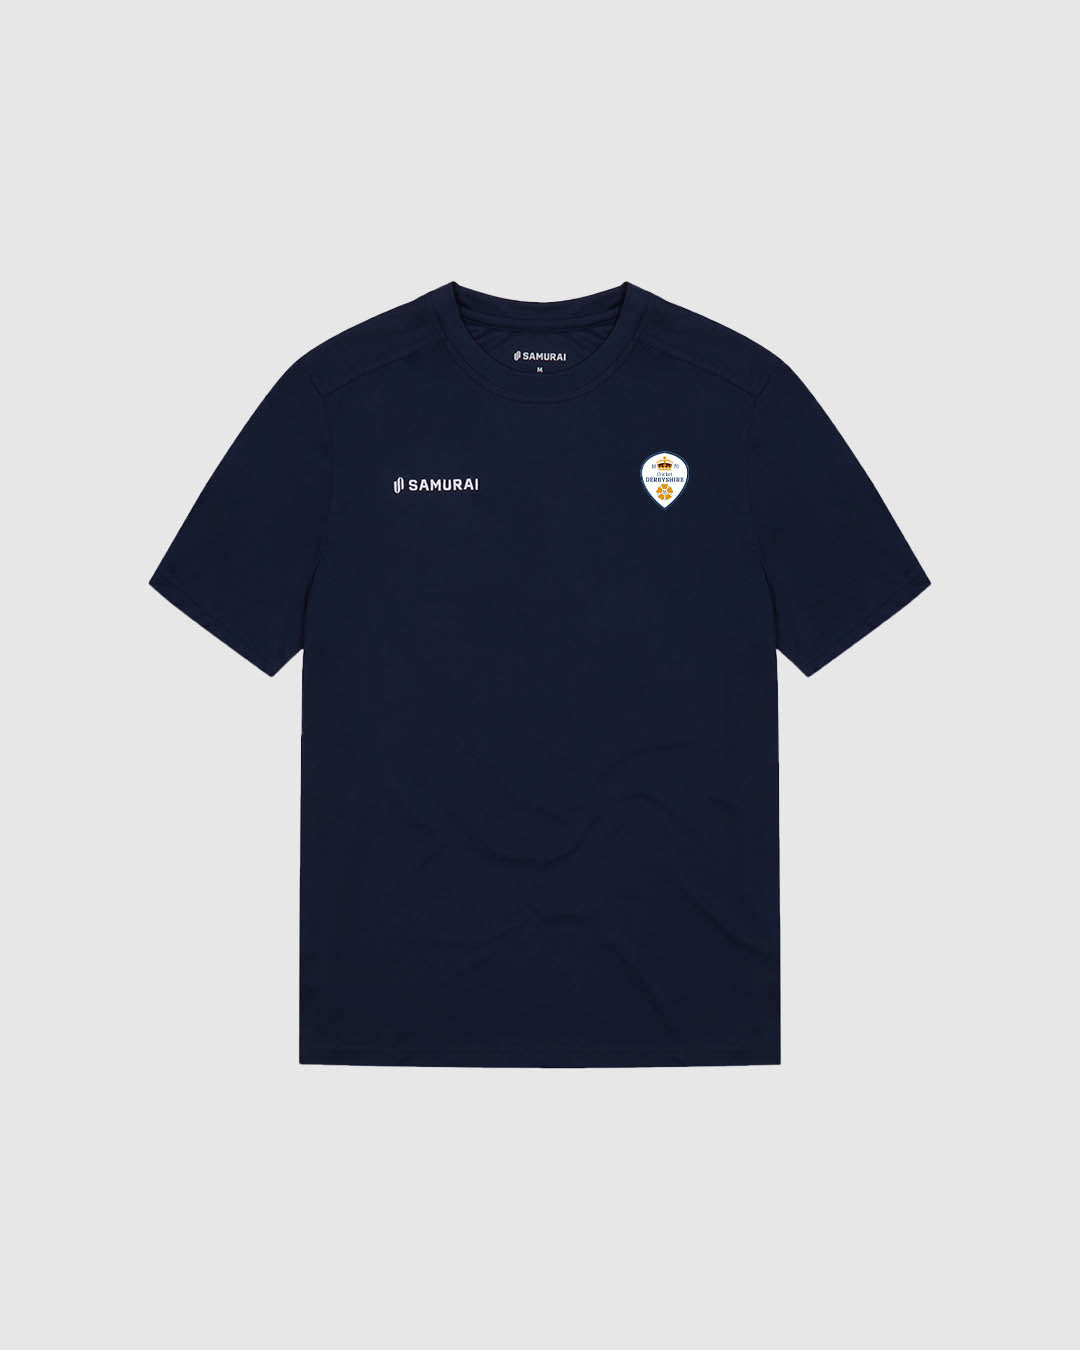 Derbyshire CCC - EP:0110 - Performance Tee 2.1 - Navy